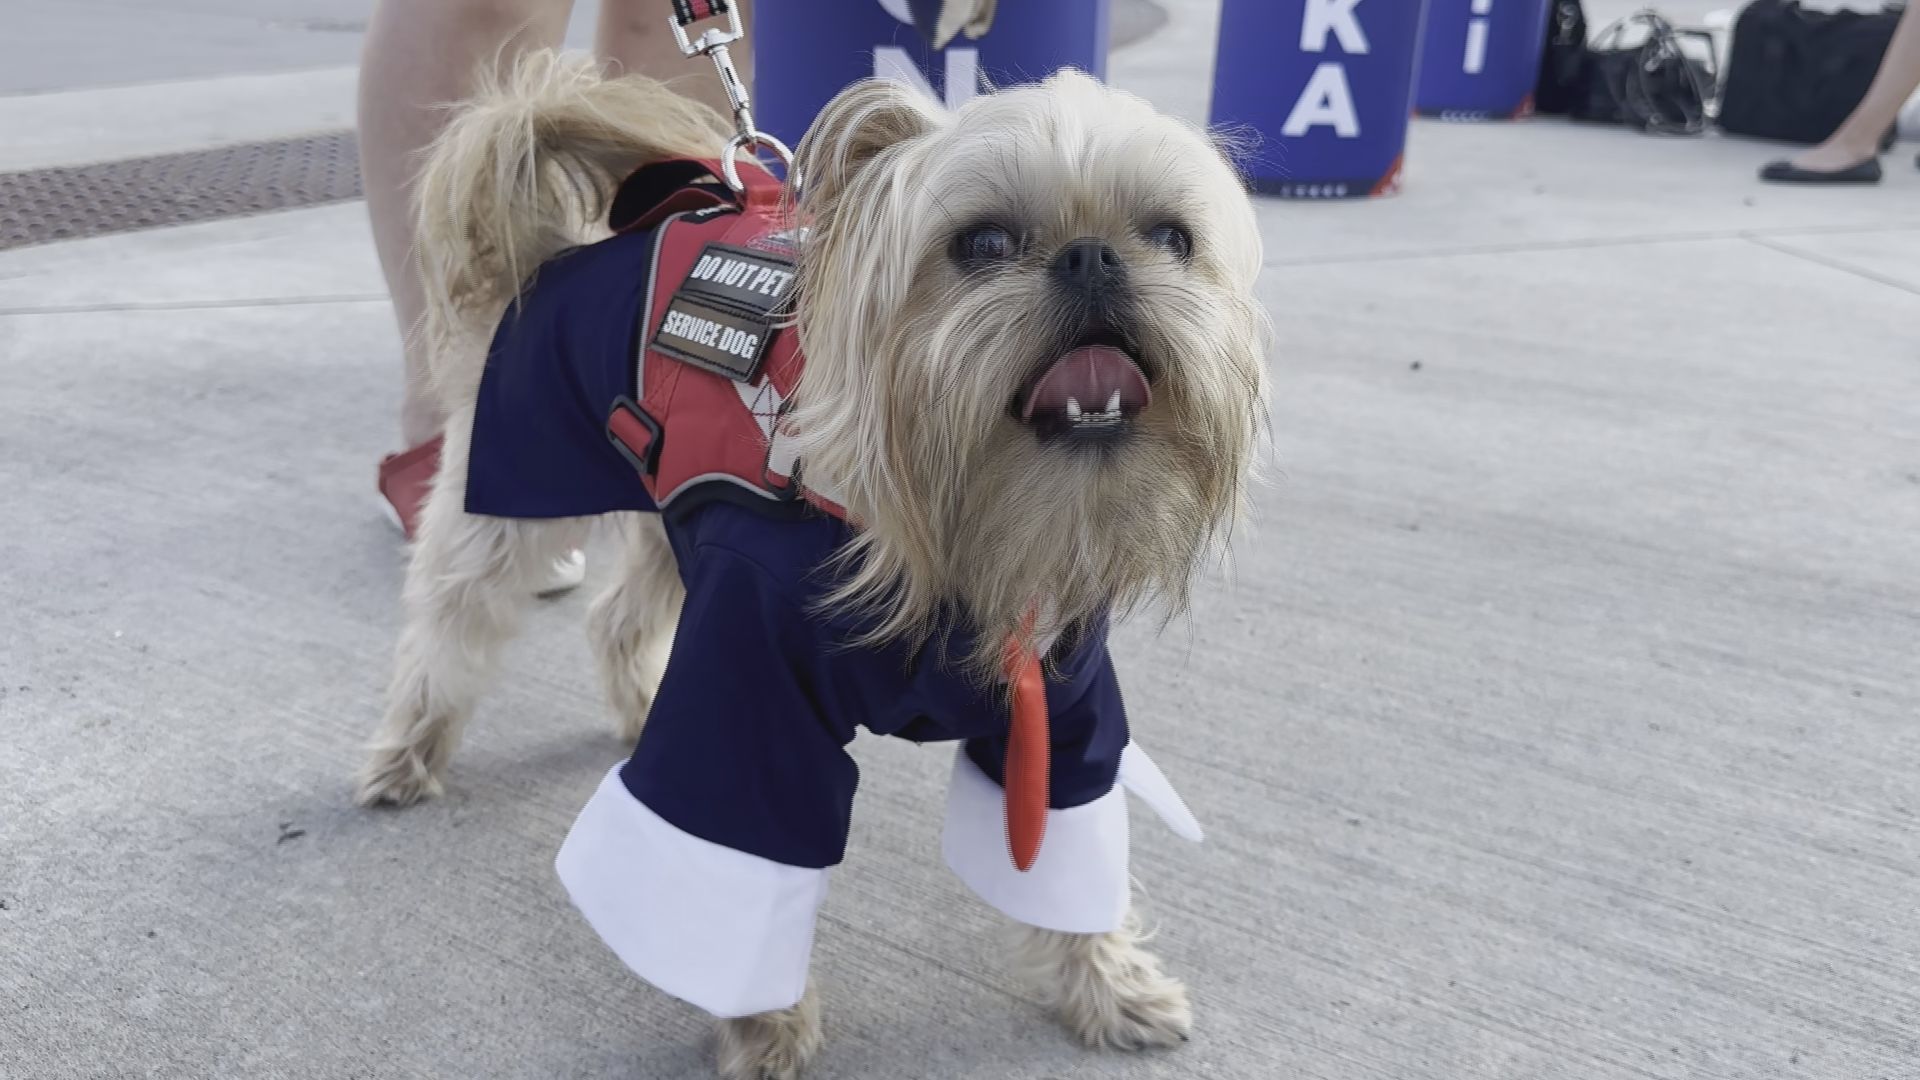 Top Hats, Jewelry and Dogs: Attendees Dress Up for Republican National Convention